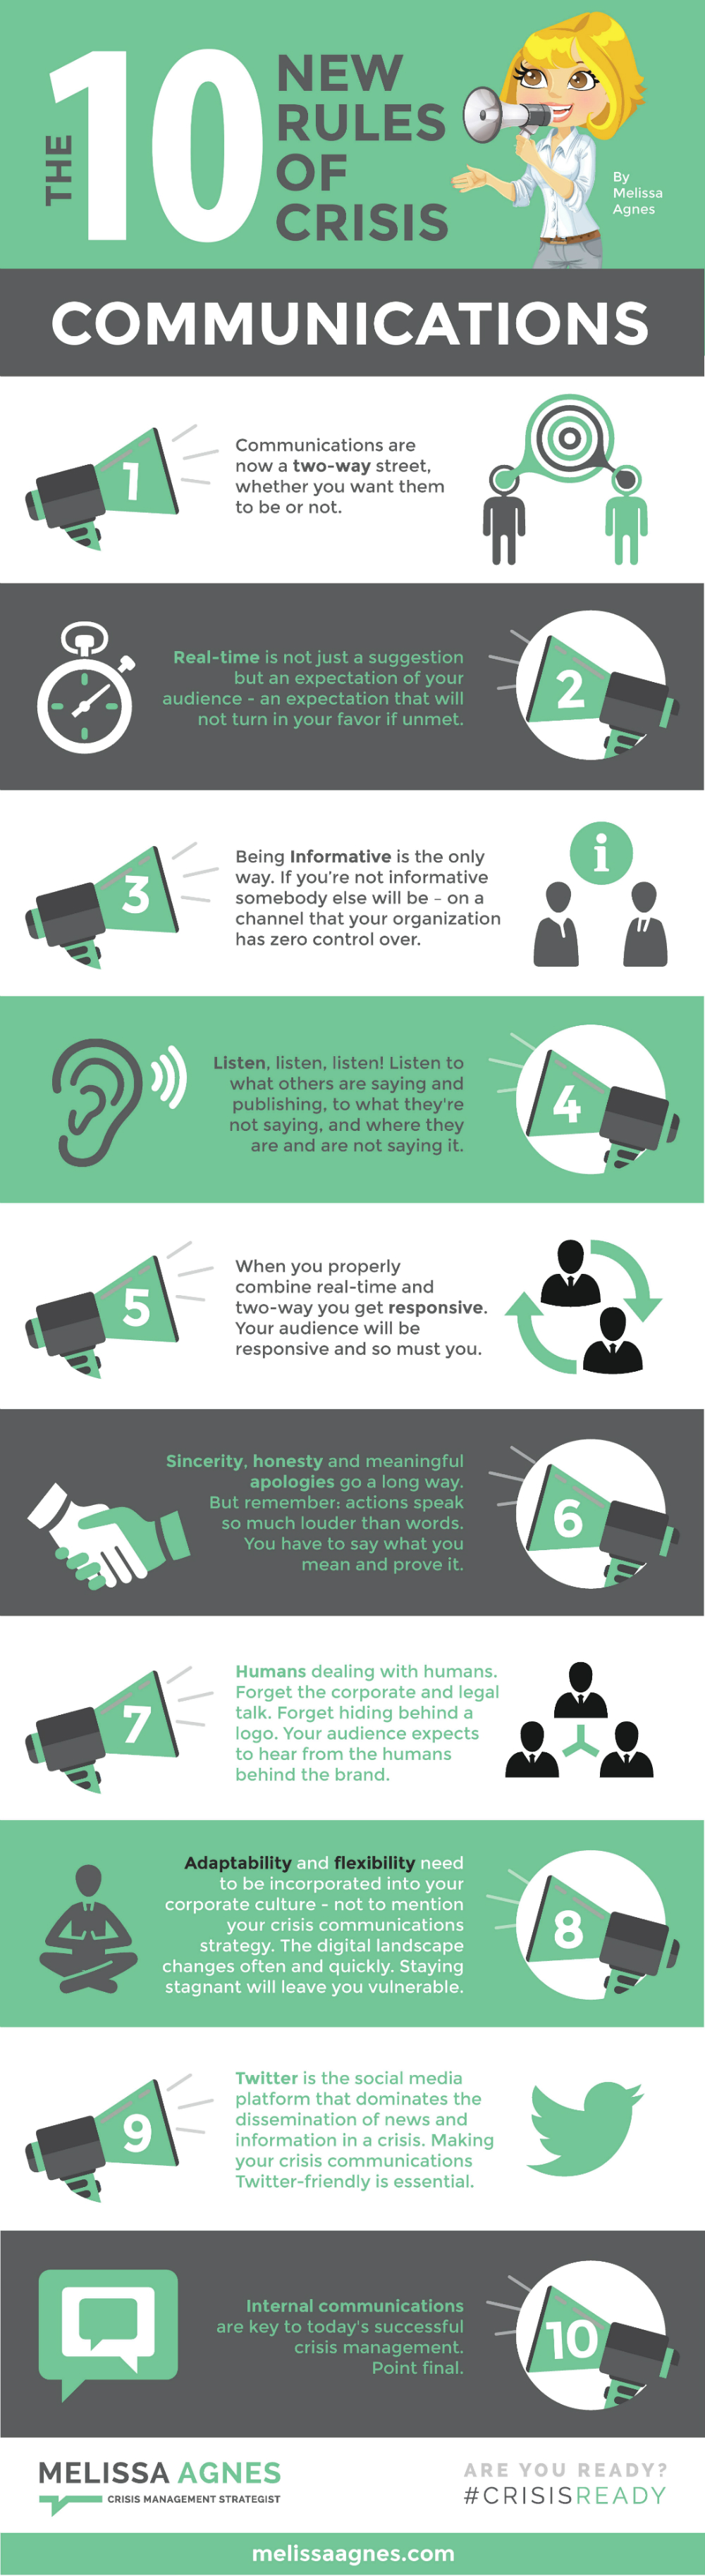 10 New Rules of Crisis Communications - Infographic